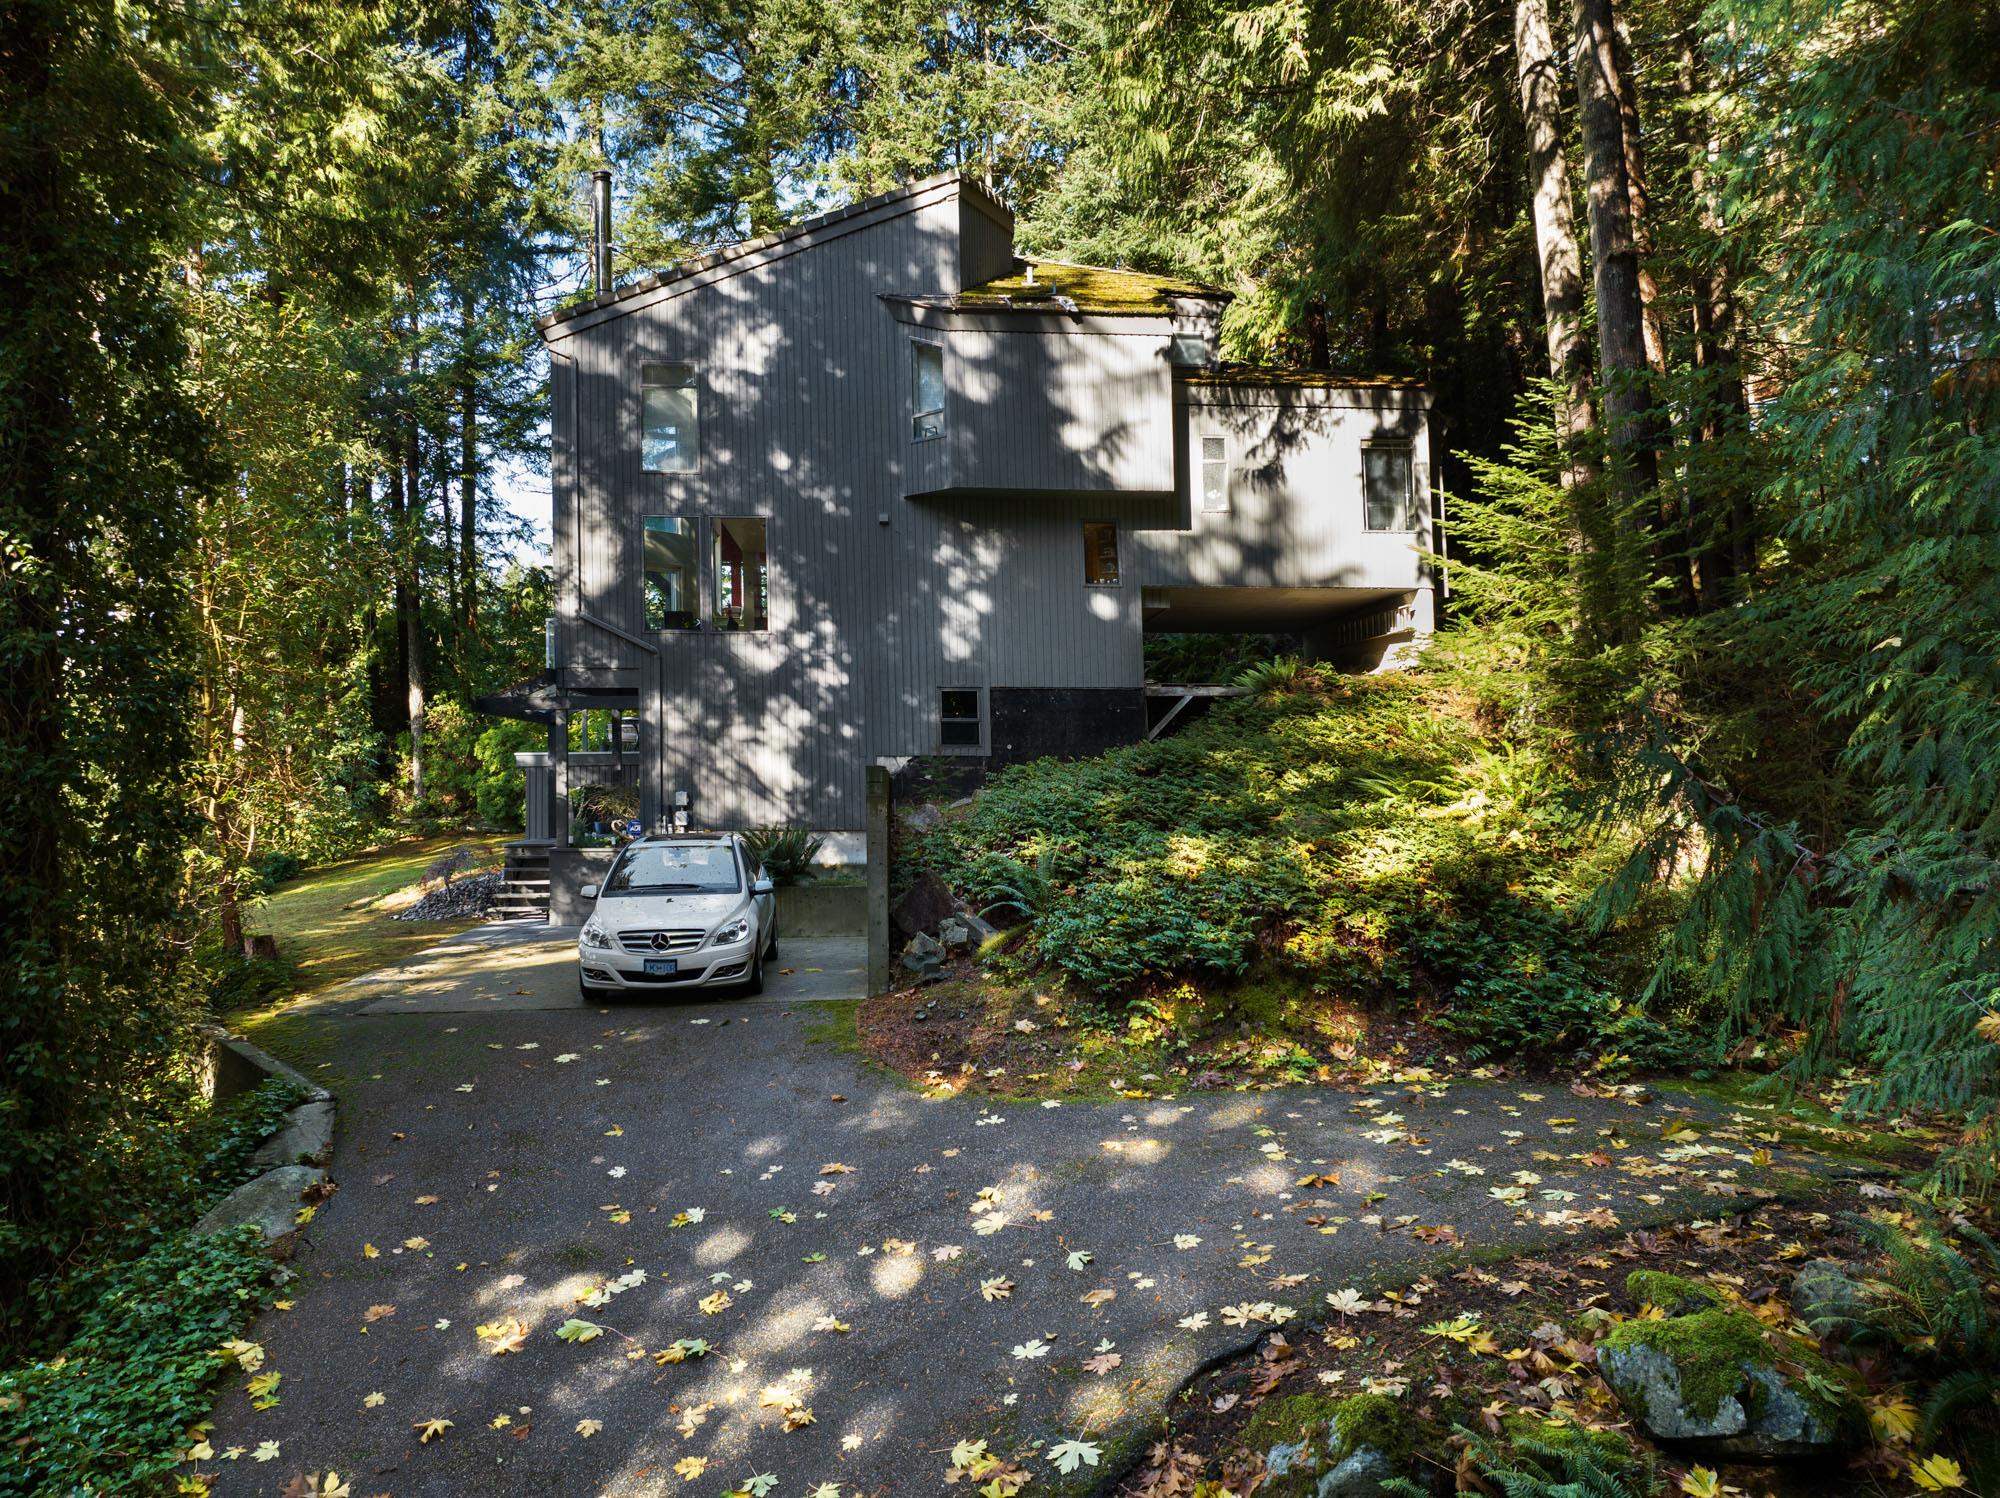 Listing image of 225 MOUNTAIN DRIVE